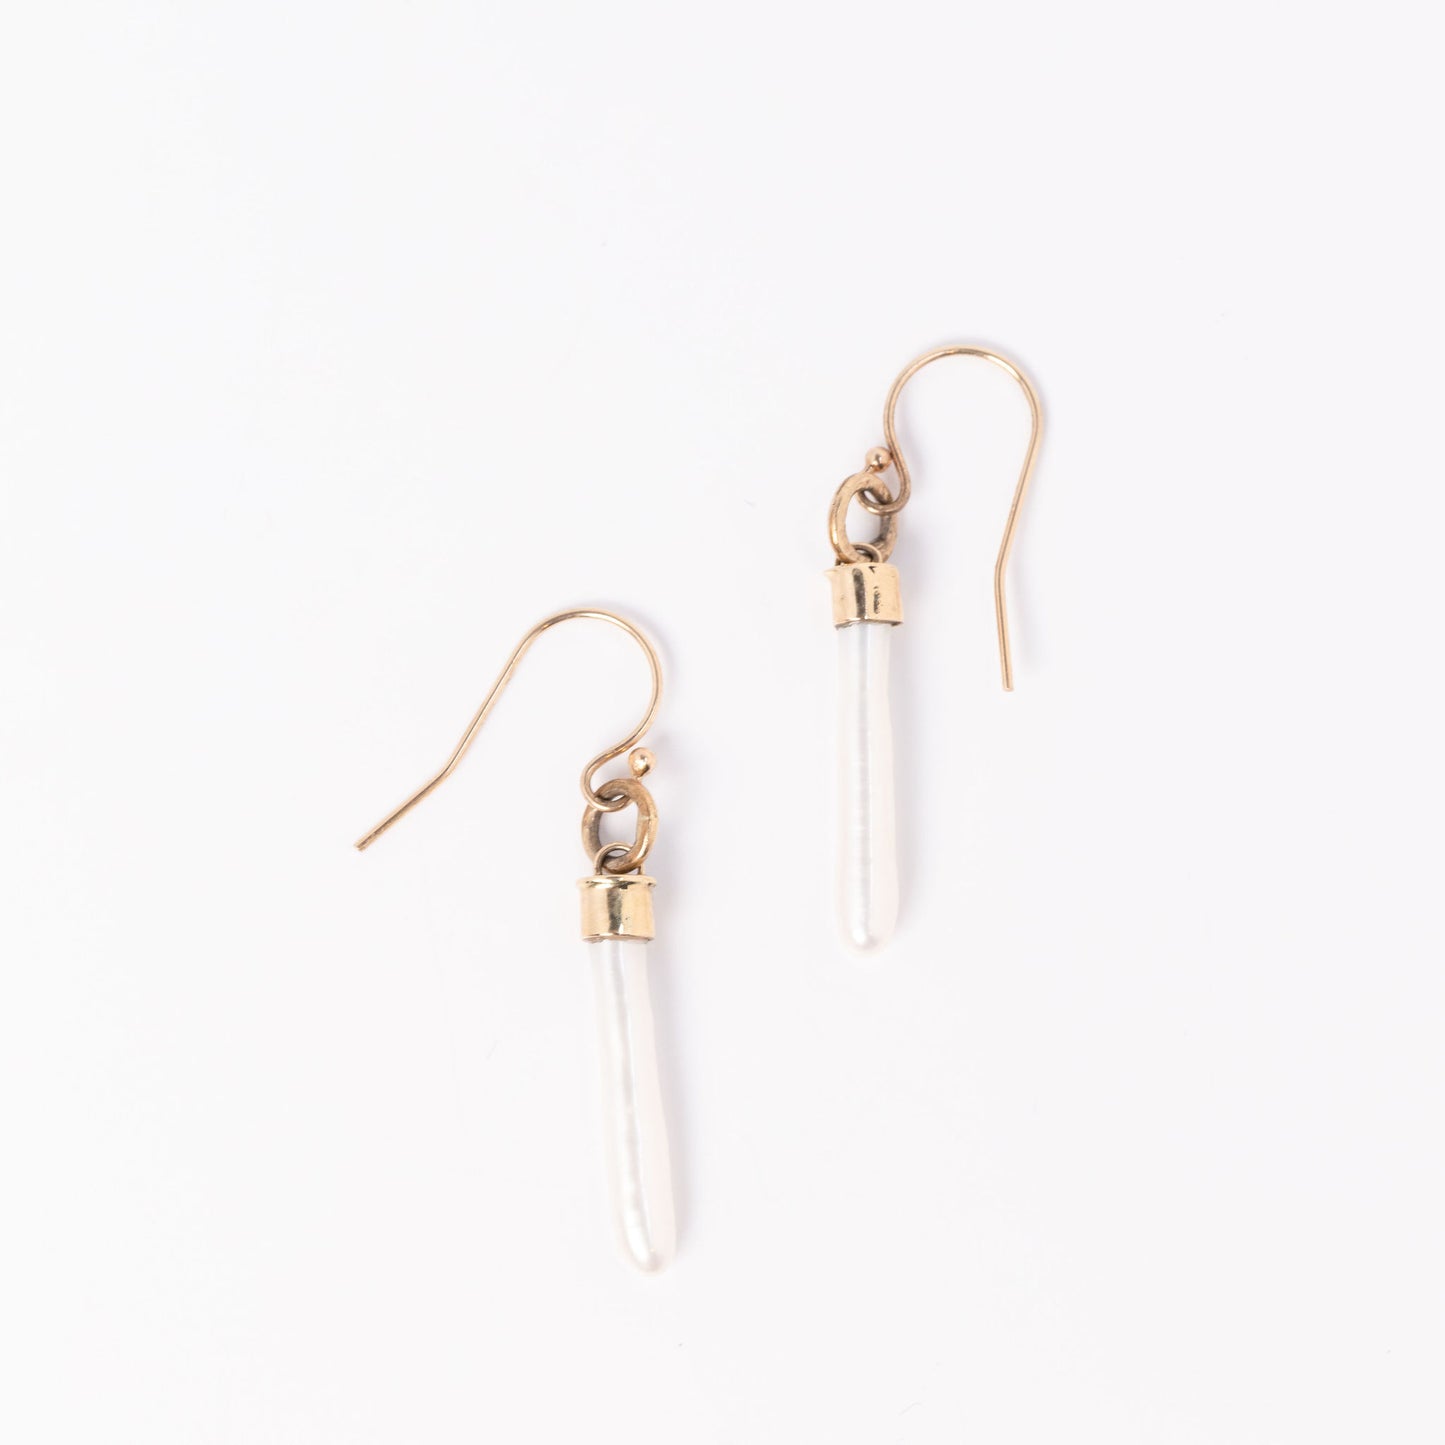 Cultivated white pearl stick earrings on white background